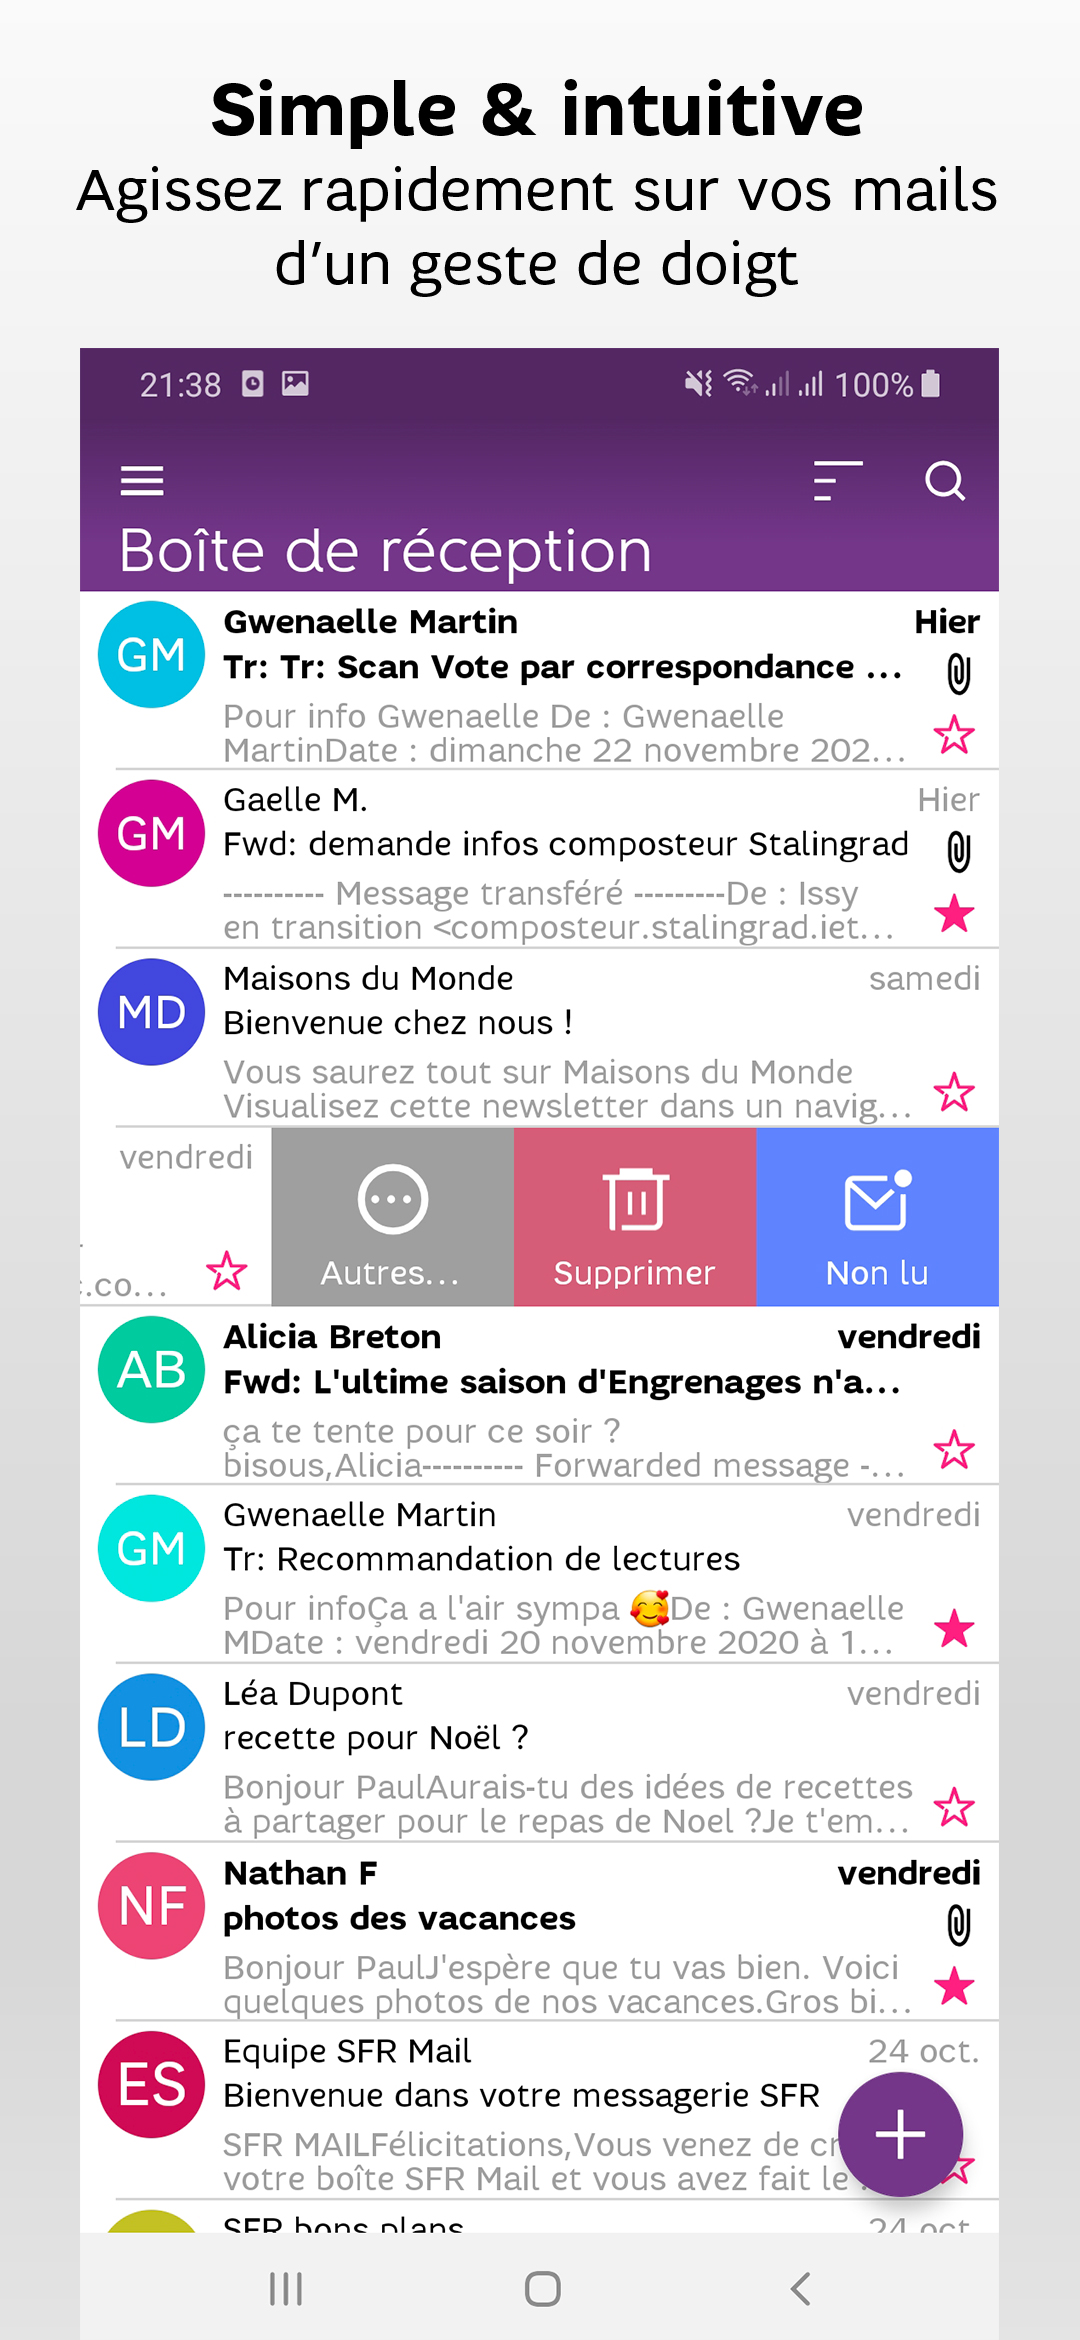 Android application SFR Mail - Boîte mail & Messagerie screenshort